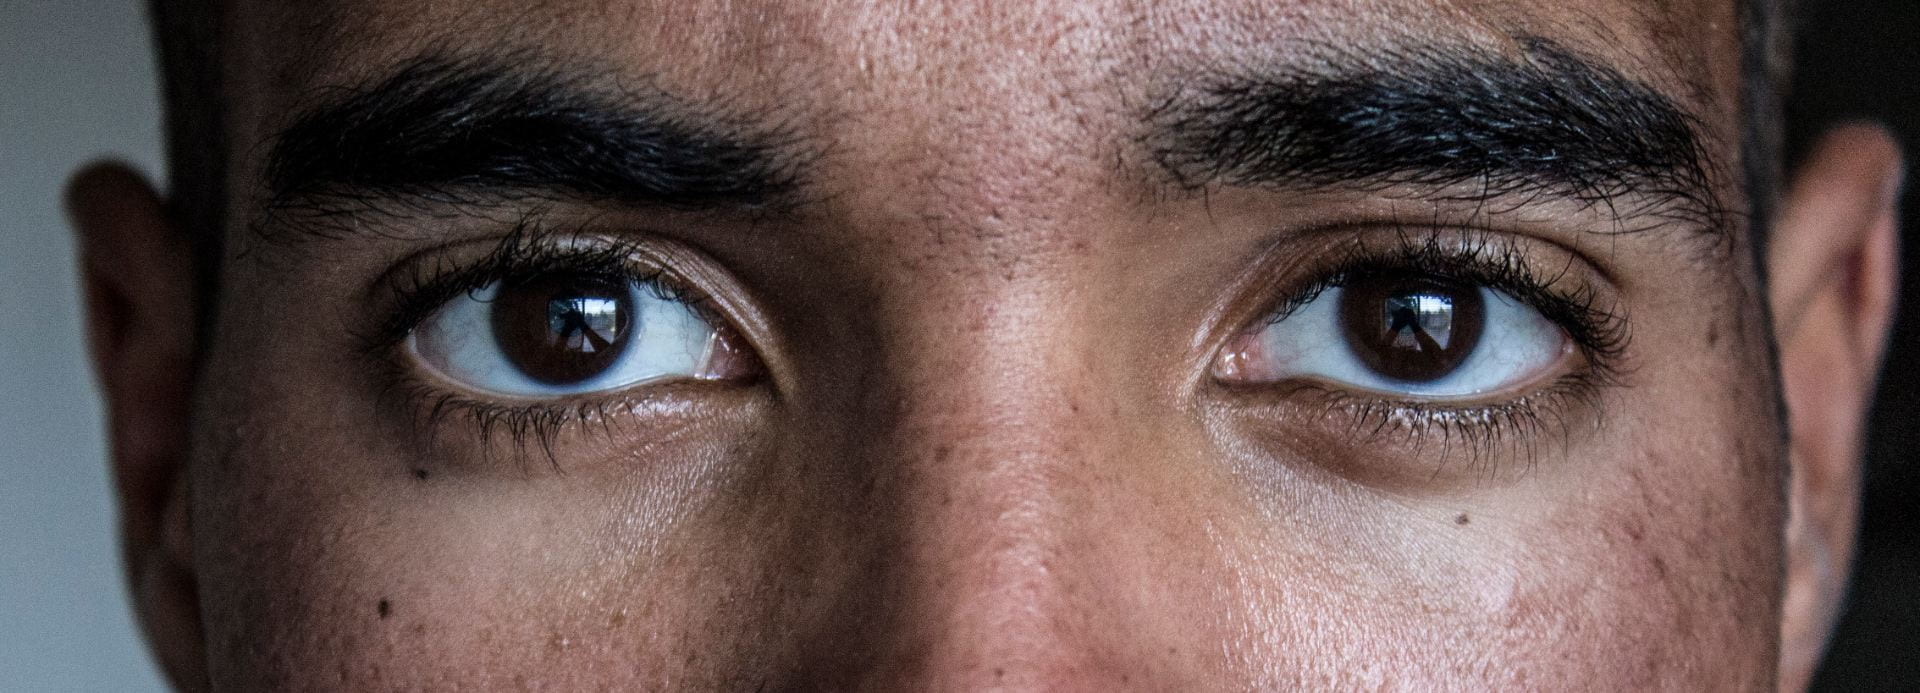 A persons eyes, looking directly into the camera.